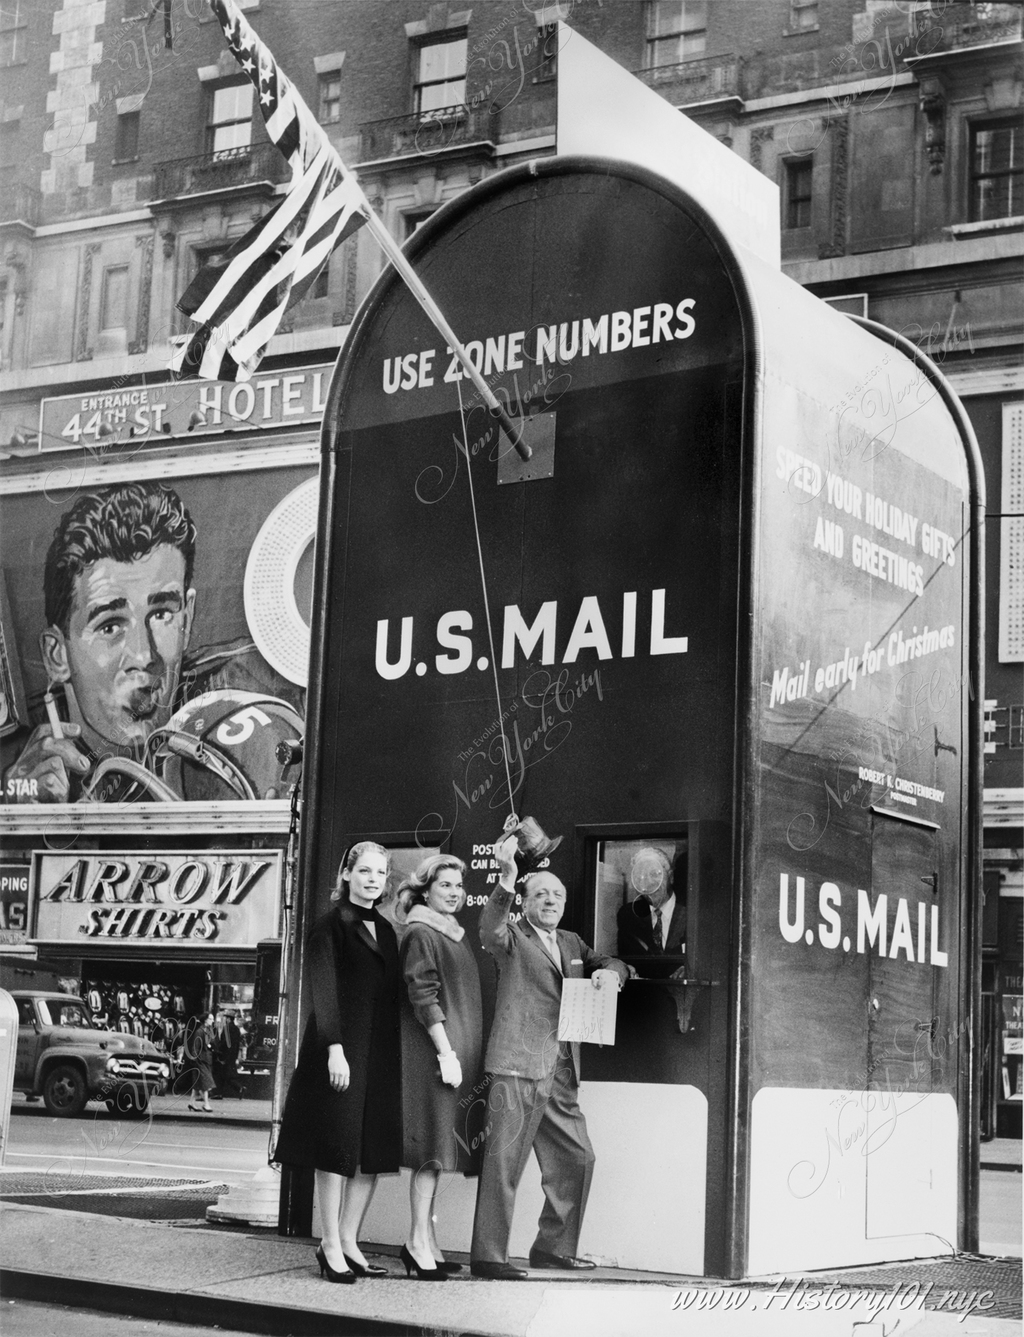 Actresses Millette Alexander and Louise King, and nightclub entertainer Ted Lewis, stand outside a giant mailbox stamp selling booth in Times Square, New York City, while Assistant Postmaster Aquiline F. Weierich dispenses stamps from inside booth